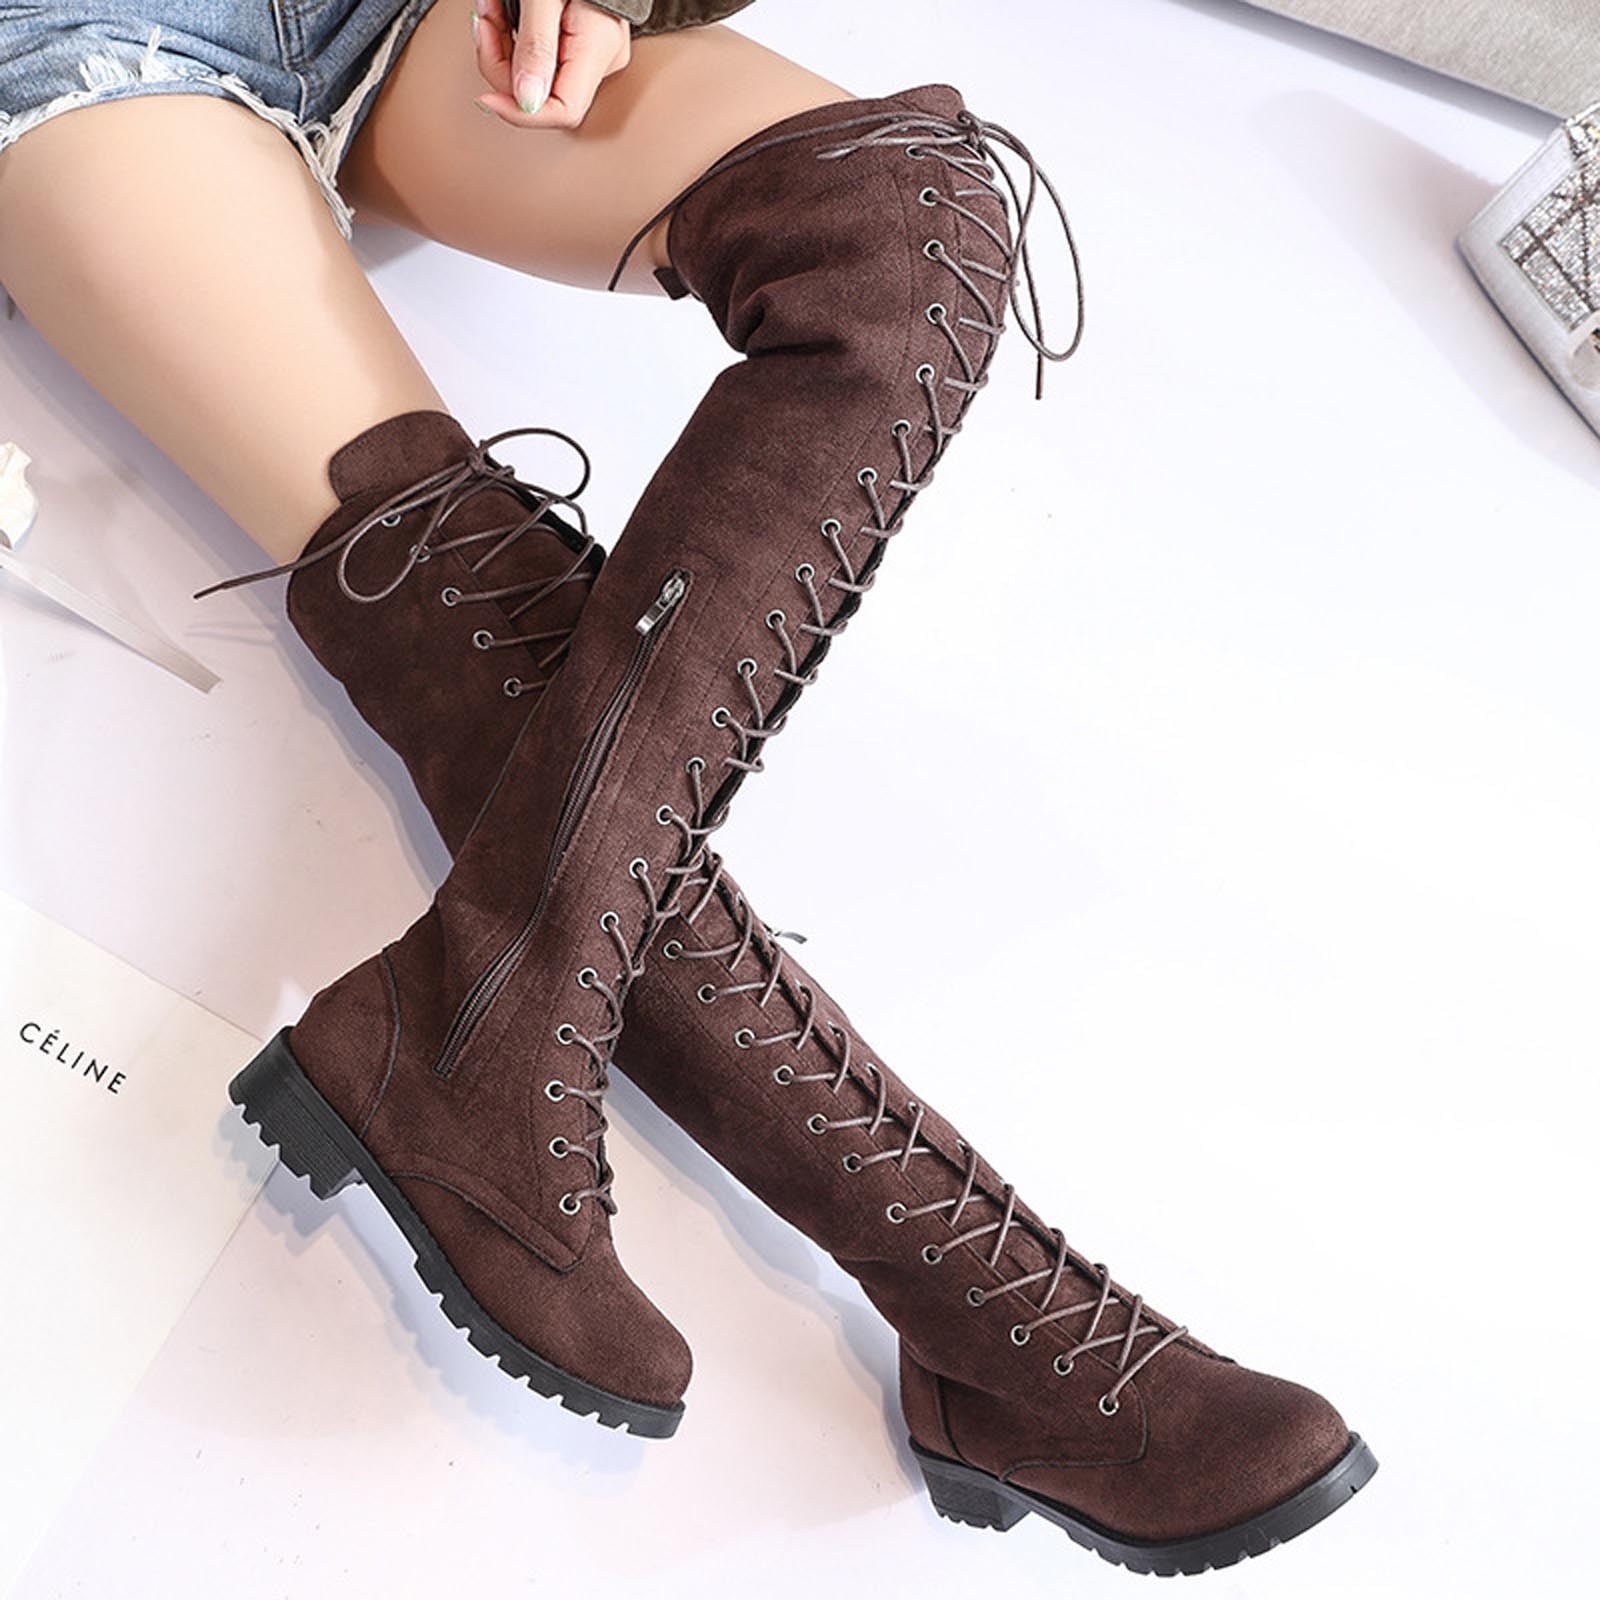 jsaierl Knee High Boots Women Winter Sexy Autumn Round Low-heeled Womens Lace Up Boots